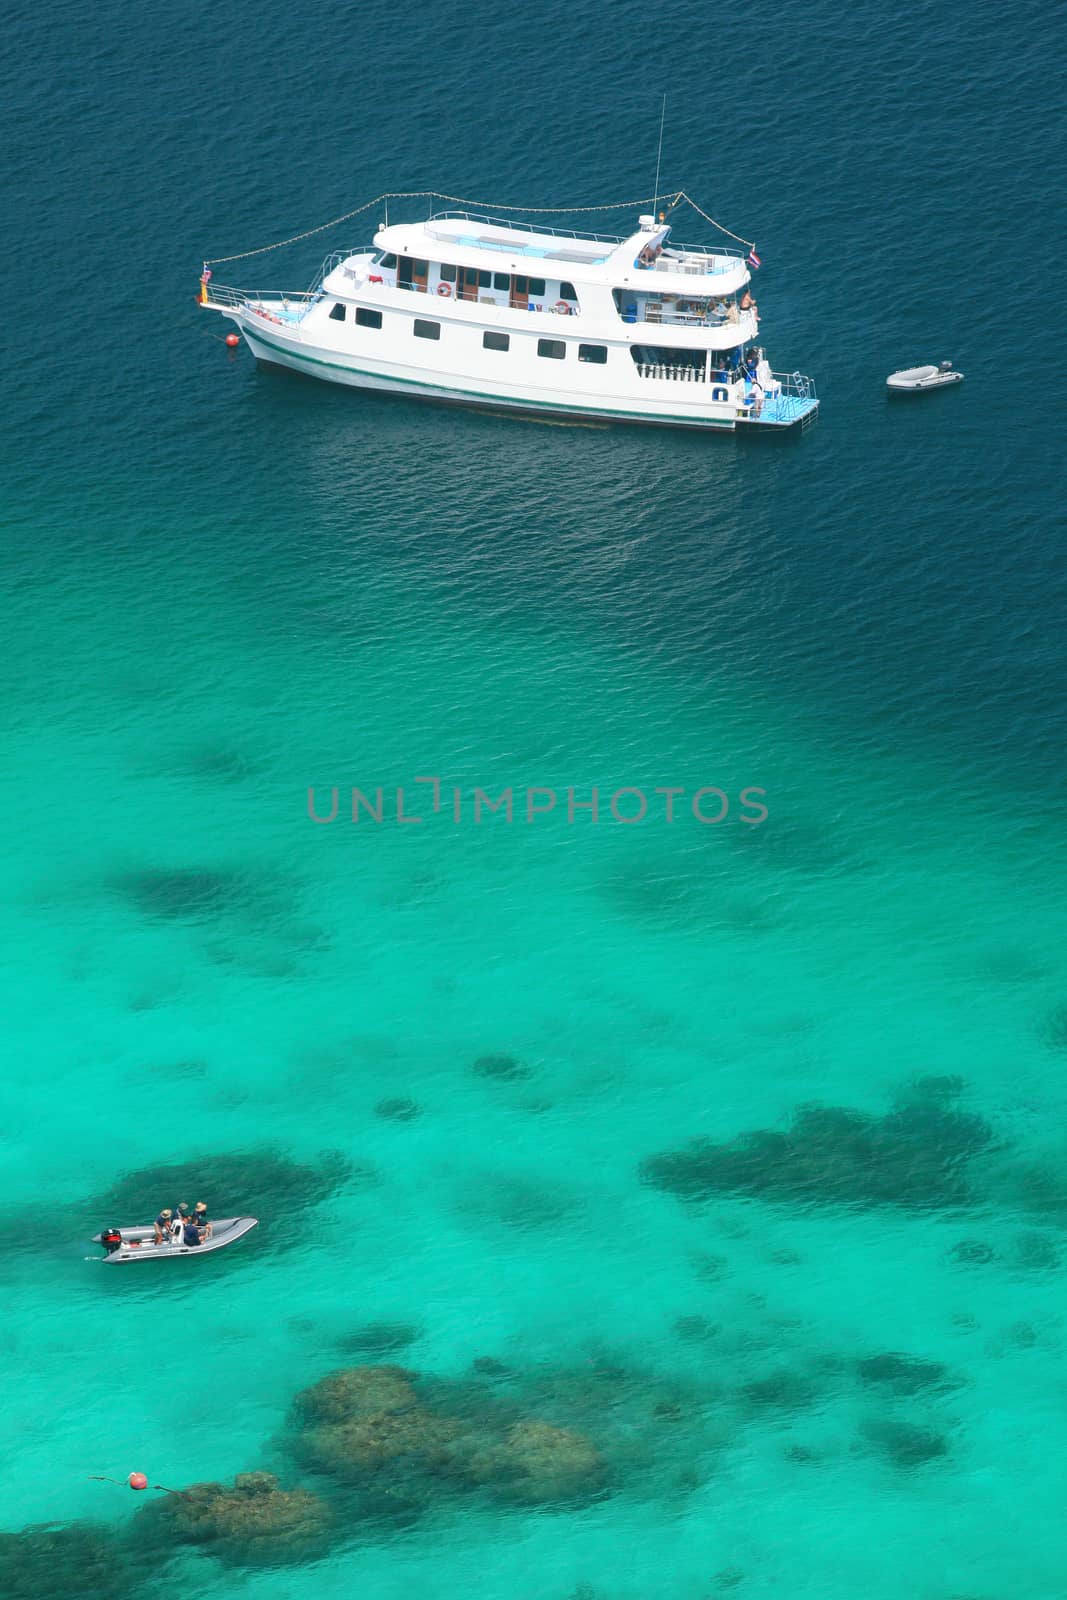 Luxery cruise on clear water at Similan island south of Thailan by think4photop